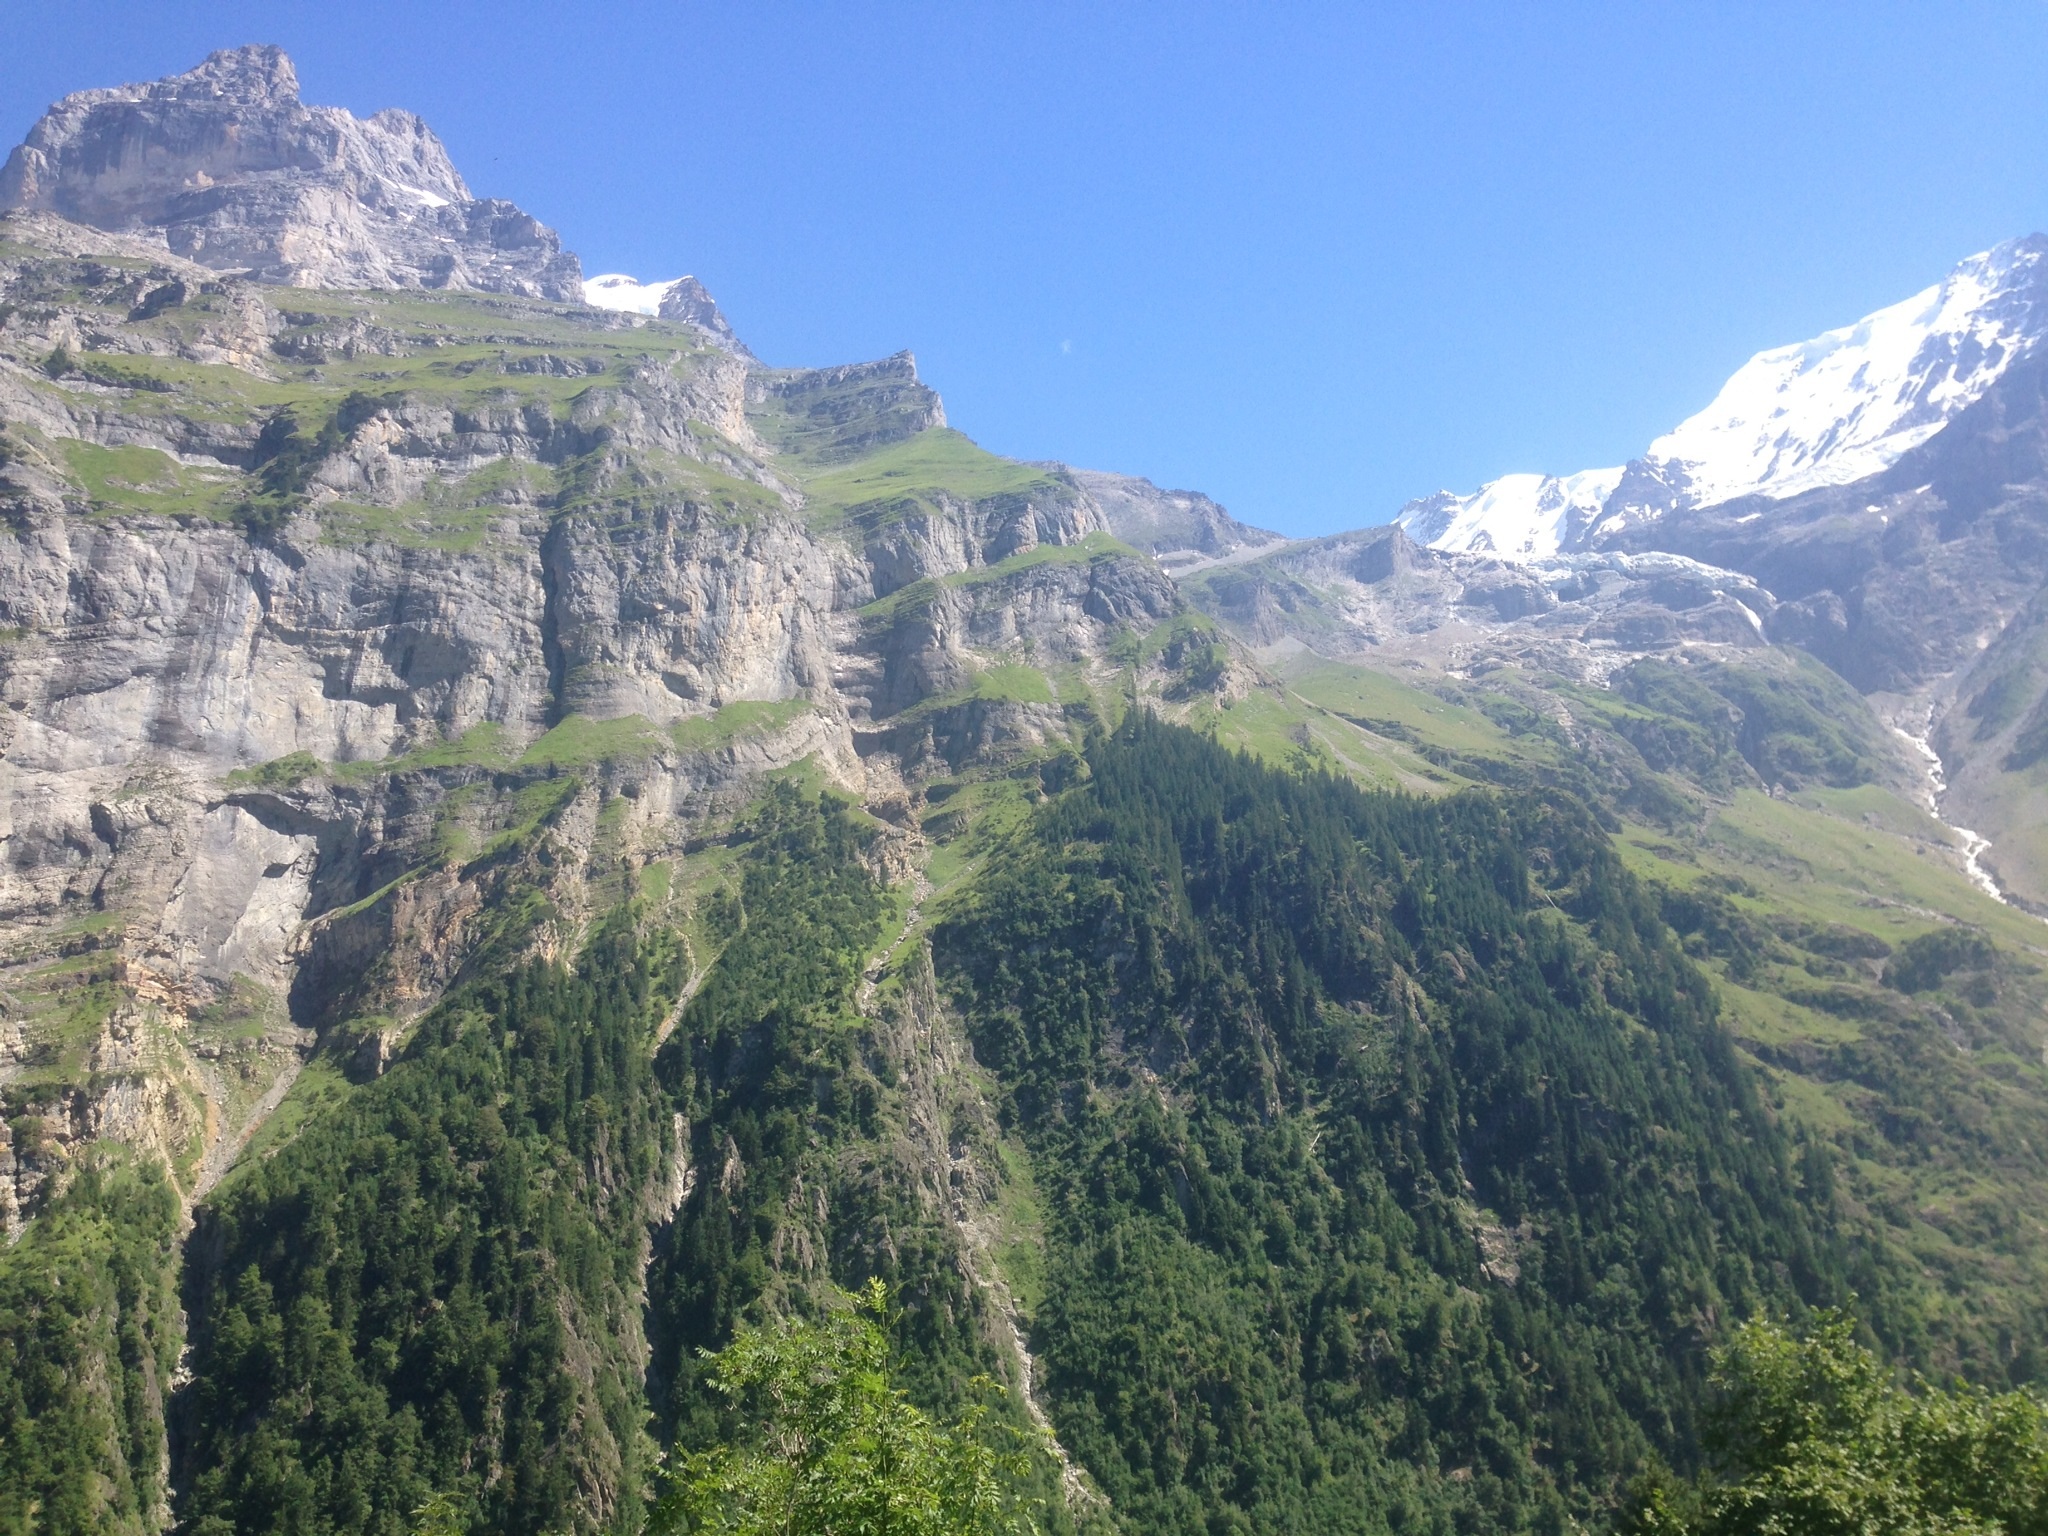 Emerged from the forest to upper Lauterbrunnen valley; this is the far wall of it